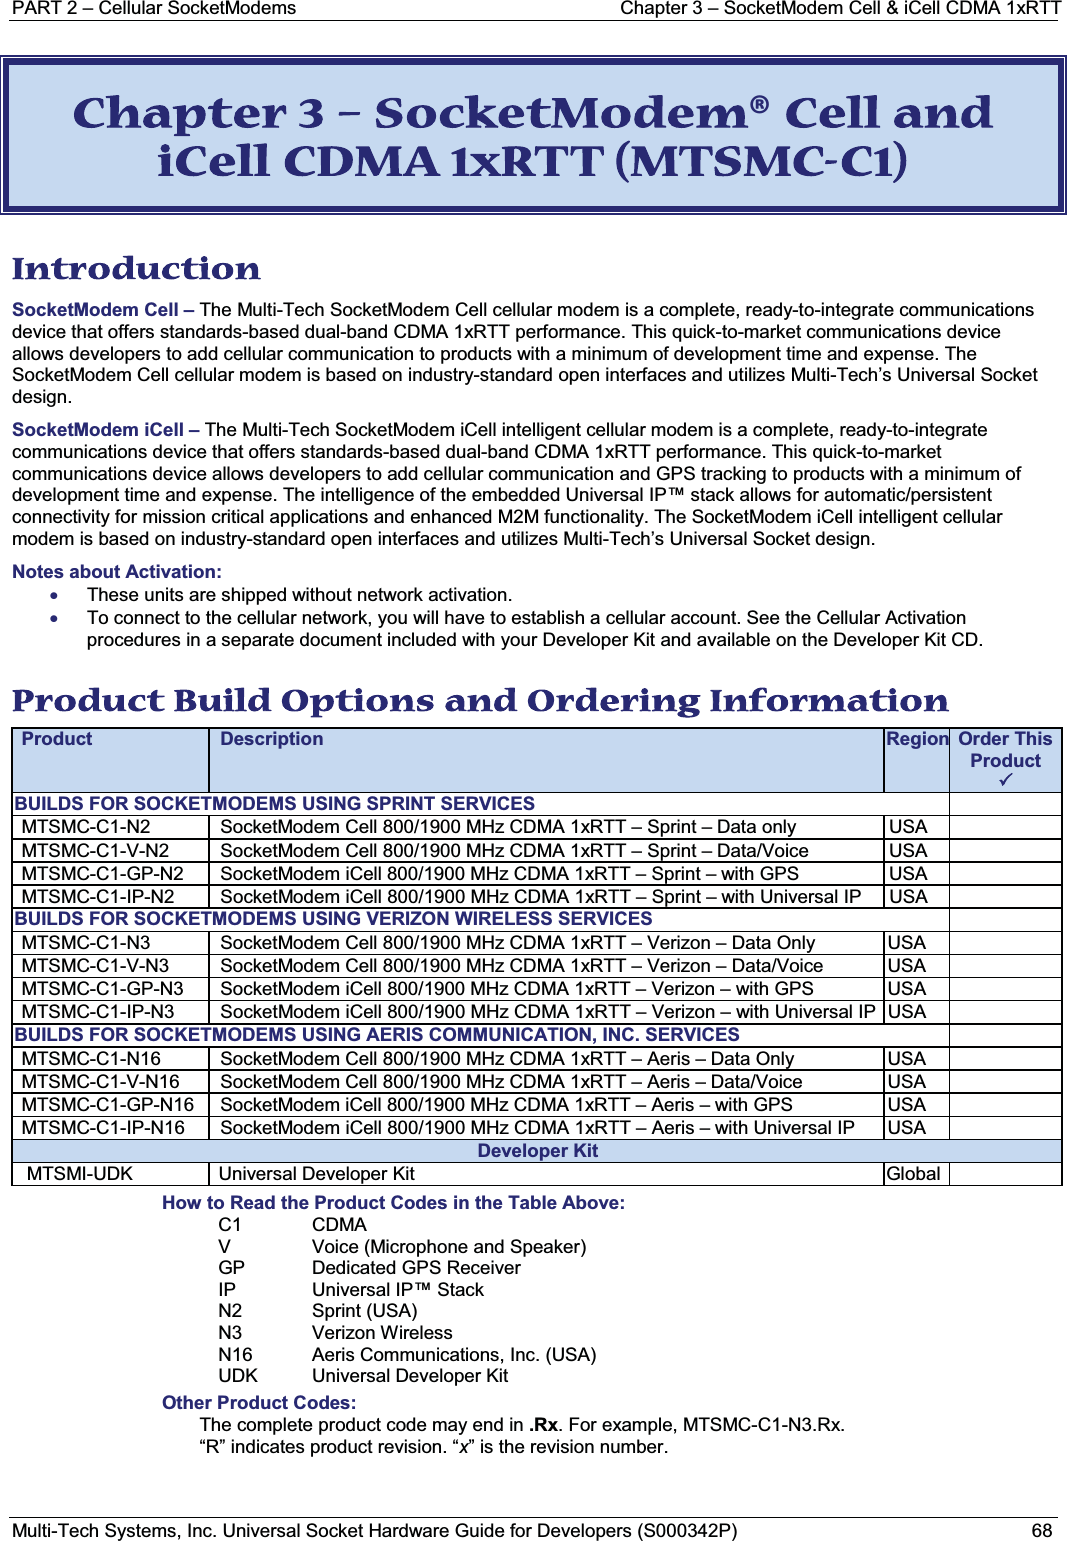 PART 2 – Cellular SocketModems Chapter 3 – SocketModem Cell &amp; iCell CDMA 1xRTT Multi-Tech Systems, Inc. Universal Socket Hardware Guide for Developers (S000342P) 68CChapter 3 – SocketModem® Cell and iCell CDMA 1xRTT (MTSMC-C1)  Introduction SocketModem Cell – The Multi-Tech SocketModem Cell cellular modem is a complete, ready-to-integrate communications device that offers standards-based dual-band CDMA 1xRTT performance. This quick-to-market communications device allows developers to add cellular communication to products with a minimum of development time and expense. TheSocketModem Cell cellular modem is based on industry-standard open interfaces and utilizes Multi-Tech’s Universal Socket design.SocketModem iCell – The Multi-Tech SocketModem iCell intelligent cellular modem is a complete, ready-to-integrate communications device that offers standards-based dual-band CDMA 1xRTT performance. This quick-to-market communications device allows developers to add cellular communication and GPS tracking to products with a minimum of development time and expense. The intelligence of the embedded Universal IP™ stack allows for automatic/persistent connectivity for mission critical applications and enhanced M2M functionality. The SocketModem iCell intelligent cellular modem is based on industry-standard open interfaces and utilizes Multi-Tech’s Universal Socket design.Notes about Activation: xThese units are shipped without network activation. xTo connect to the cellular network, you will have to establish a cellular account. See the Cellular Activation procedures in a separate document included with your Developer Kit and available on the Developer Kit CD.Product Build Options and Ordering Information Product Description Region Order This Product3BUILDS FOR SOCKETMODEMS USING SPRINT SERVICES  MTSMC-C1-N2 SocketModem Cell 800/1900 MHz CDMA 1xRTT – Sprint – Data only USAMTSMC-C1-V-N2 SocketModem Cell 800/1900 MHz CDMA 1xRTT – Sprint – Data/Voice USAMTSMC-C1-GP-N2 SocketModem iCell 800/1900 MHz CDMA 1xRTT – Sprint – with GPS USAMTSMC-C1-IP-N2 SocketModem iCell 800/1900 MHz CDMA 1xRTT – Sprint – with Universal IP USABUILDS FOR SOCKETMODEMS USING VERIZON WIRELESS SERVICESMTSMC-C1-N3 SocketModem Cell 800/1900 MHz CDMA 1xRTT – Verizon – Data Only  USAMTSMC-C1-V-N3 SocketModem Cell 800/1900 MHz CDMA 1xRTT – Verizon – Data/Voice USAMTSMC-C1-GP-N3 SocketModem iCell 800/1900 MHz CDMA 1xRTT – Verizon – with GPS USAMTSMC-C1-IP-N3 SocketModem iCell 800/1900 MHz CDMA 1xRTT – Verizon – with Universal IP USABUILDS FOR SOCKETMODEMS USING AERIS COMMUNICATION, INC. SERVICESMTSMC-C1-N16 SocketModem Cell 800/1900 MHz CDMA 1xRTT – Aeris – Data Only USAMTSMC-C1-V-N16 SocketModem Cell 800/1900 MHz CDMA 1xRTT – Aeris – Data/Voice USAMTSMC-C1-GP-N16 SocketModem iCell 800/1900 MHz CDMA 1xRTT – Aeris – with GPS USAMTSMC-C1-IP-N16 SocketModem iCell 800/1900 MHz CDMA 1xRTT – Aeris – with Universal IP USADeveloper KitMTSMI-UDK Universal Developer Kit GlobalHow to Read the Product Codes in the Table Above:C1 CDMAV Voice (Microphone and Speaker)GP Dedicated GPS ReceiverIP Universal IP™ StackN2 Sprint (USA)N3 Verizon WirelessN16 Aeris Communications, Inc. (USA)UDK Universal Developer KitOther Product Codes:The complete product code may end in .Rx. For example, MTSMC-C1-N3.Rx.“R” indicates product revision. “x” is the revision number.